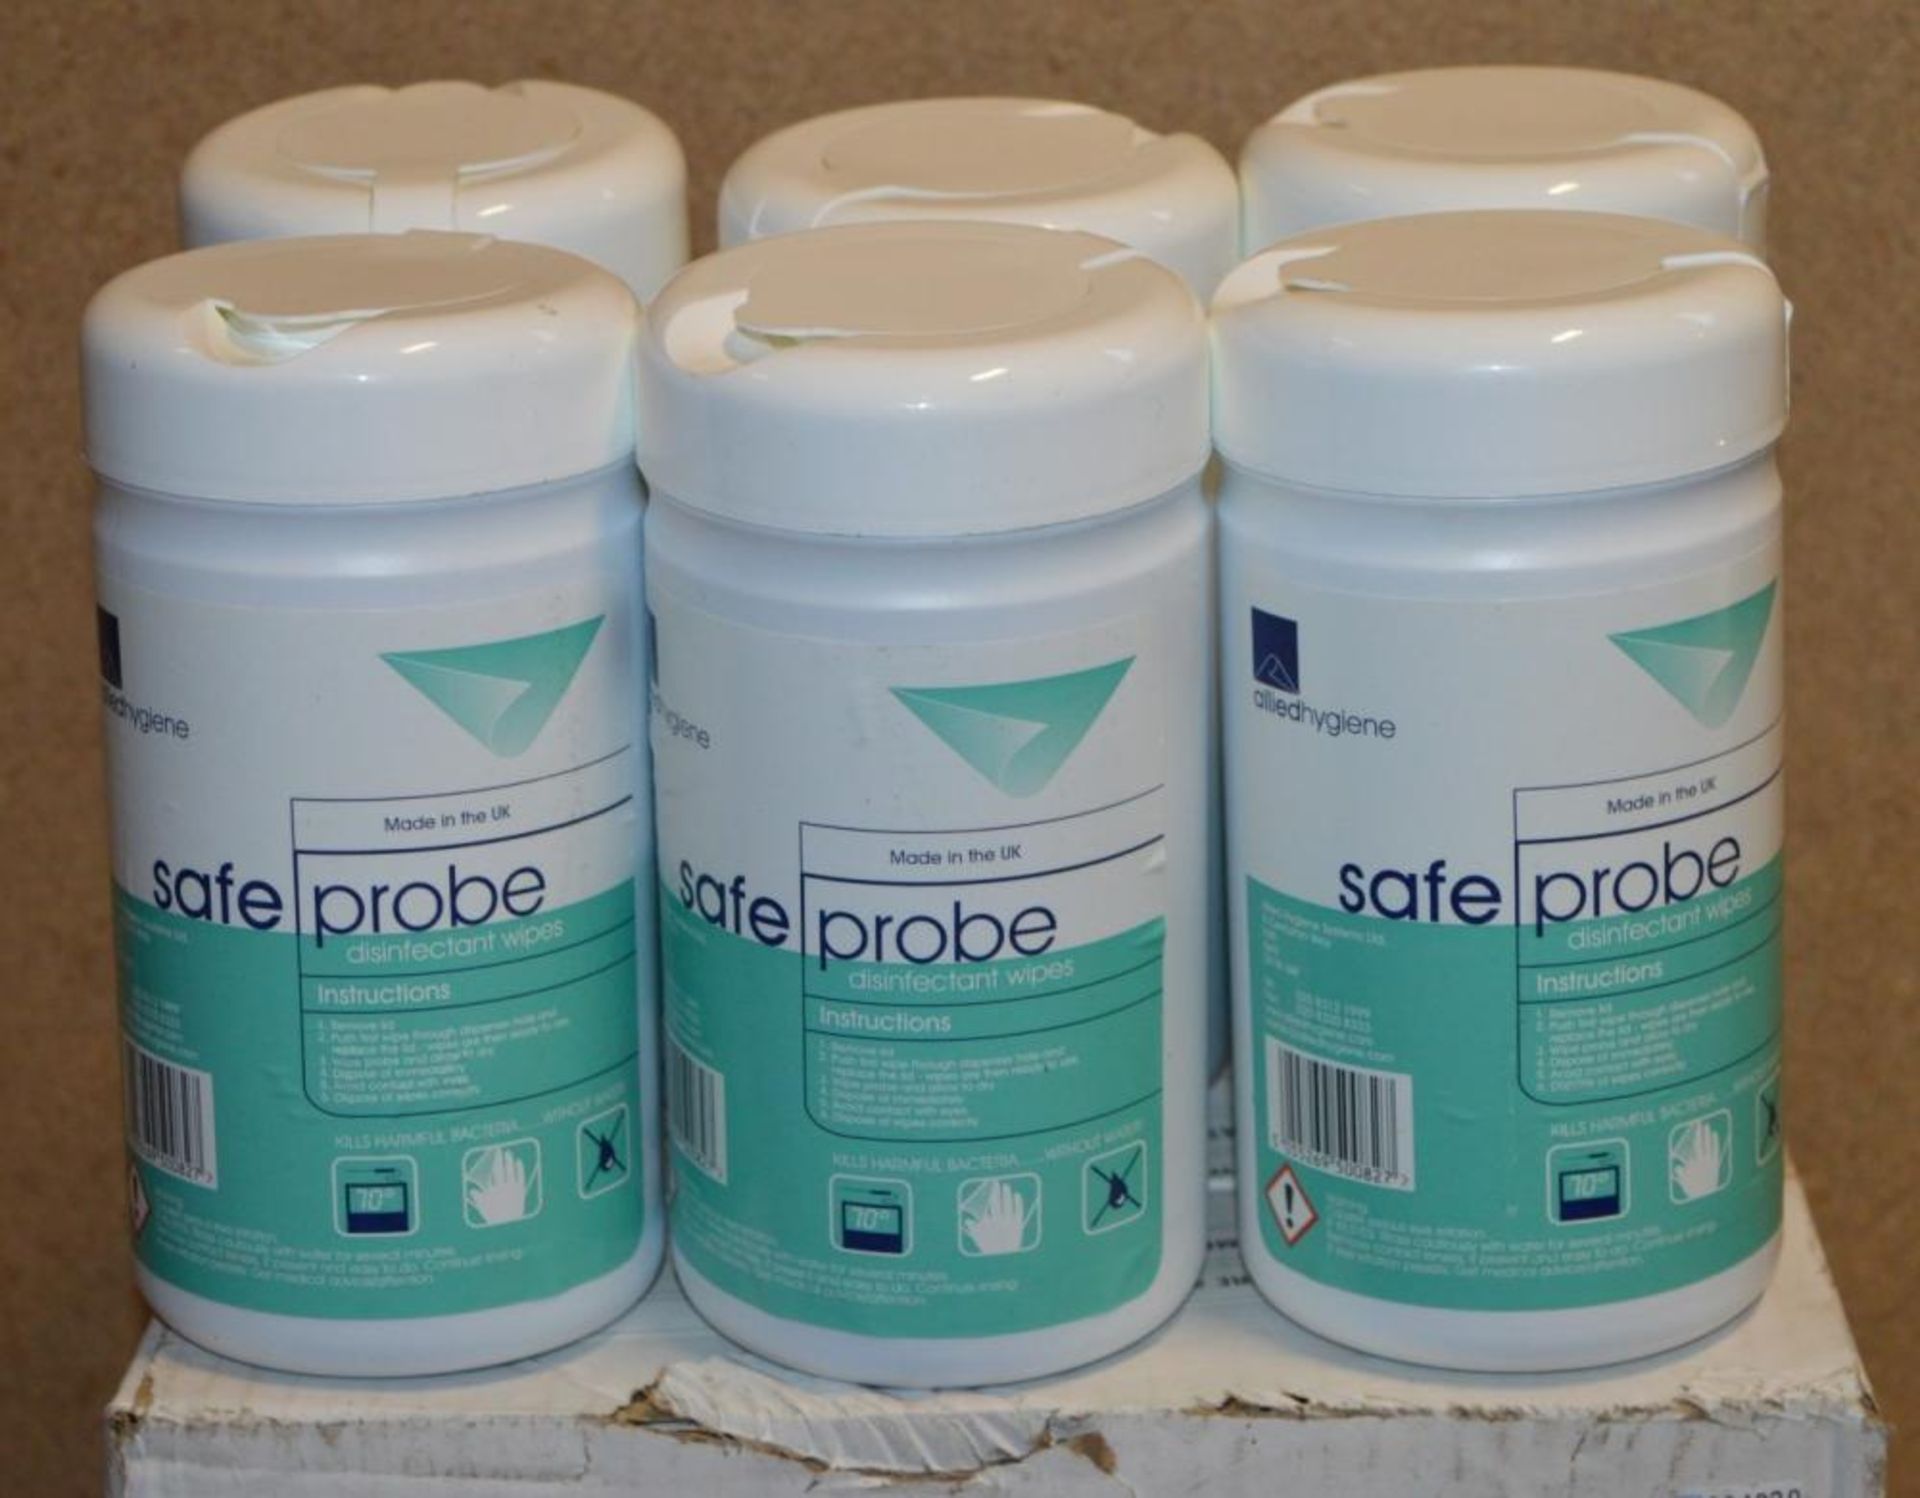 6 x Tubs of Anti-Bacterial Safe Probe Wipes - Each Tub Contains 200 Wipes - Disinfectant Cleaning